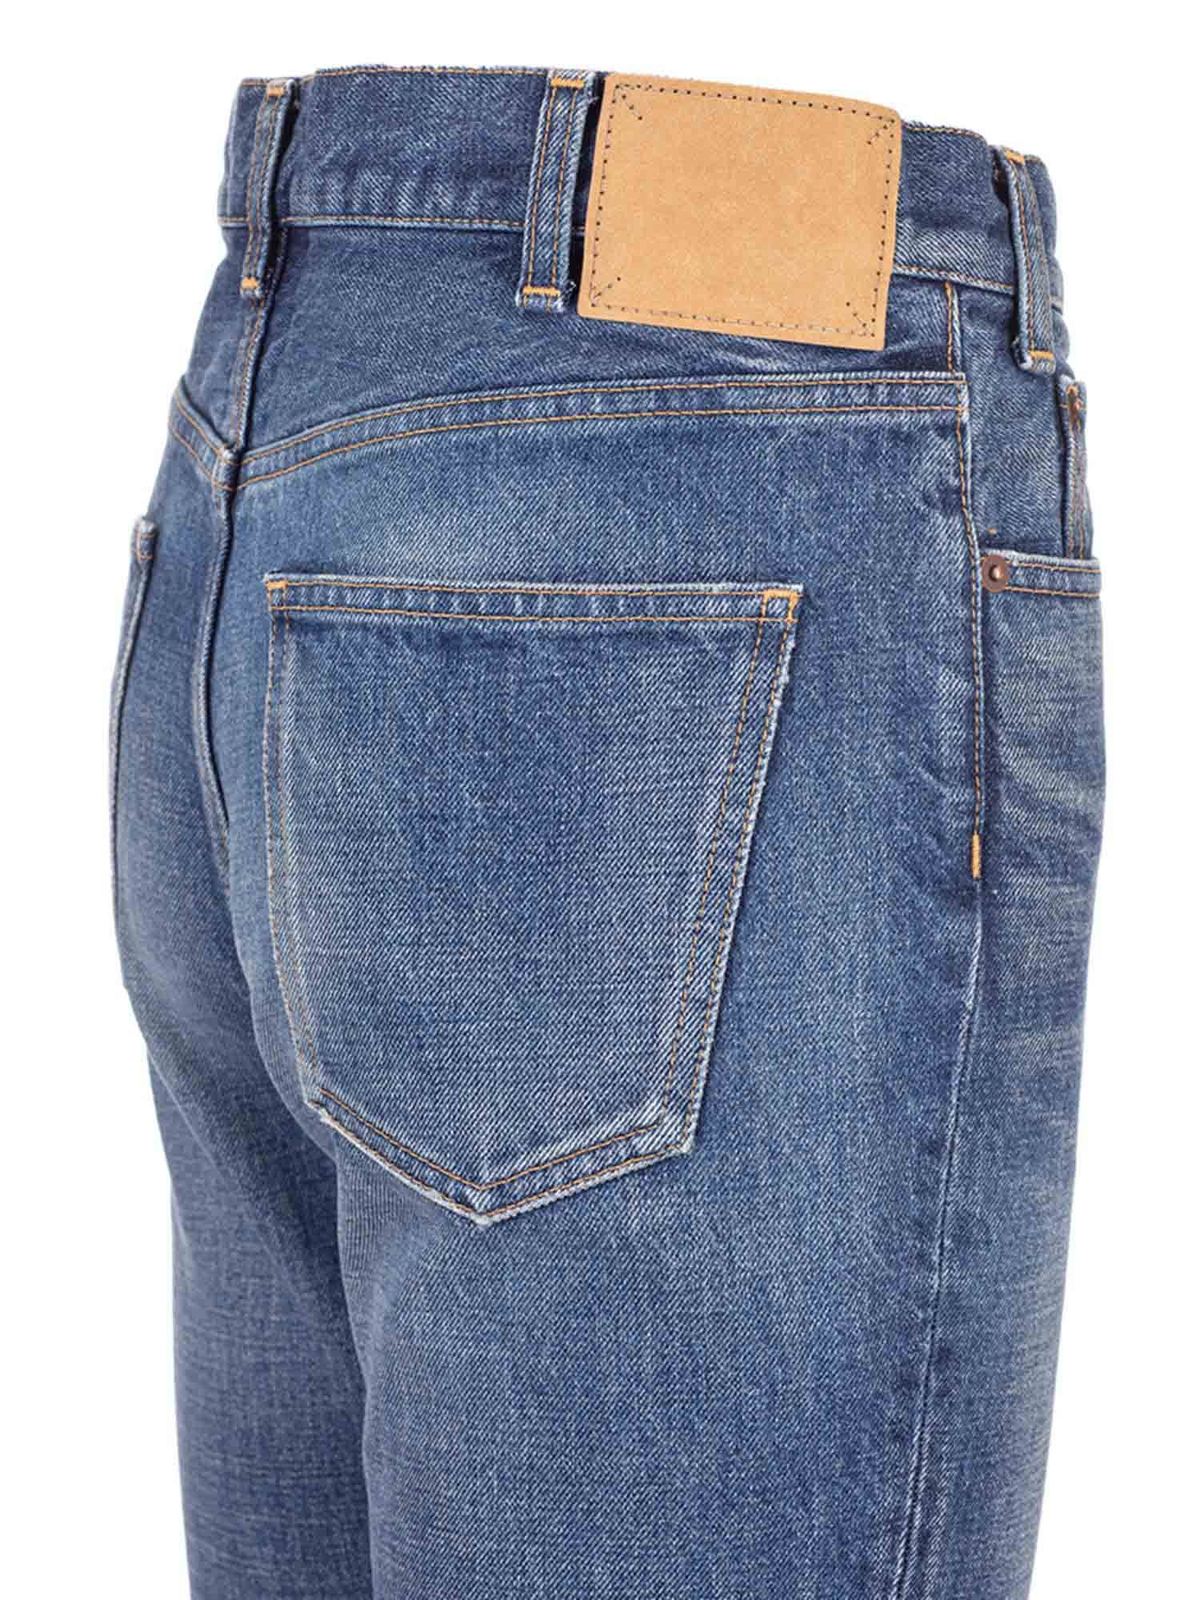 Union wash slim jeans in blue